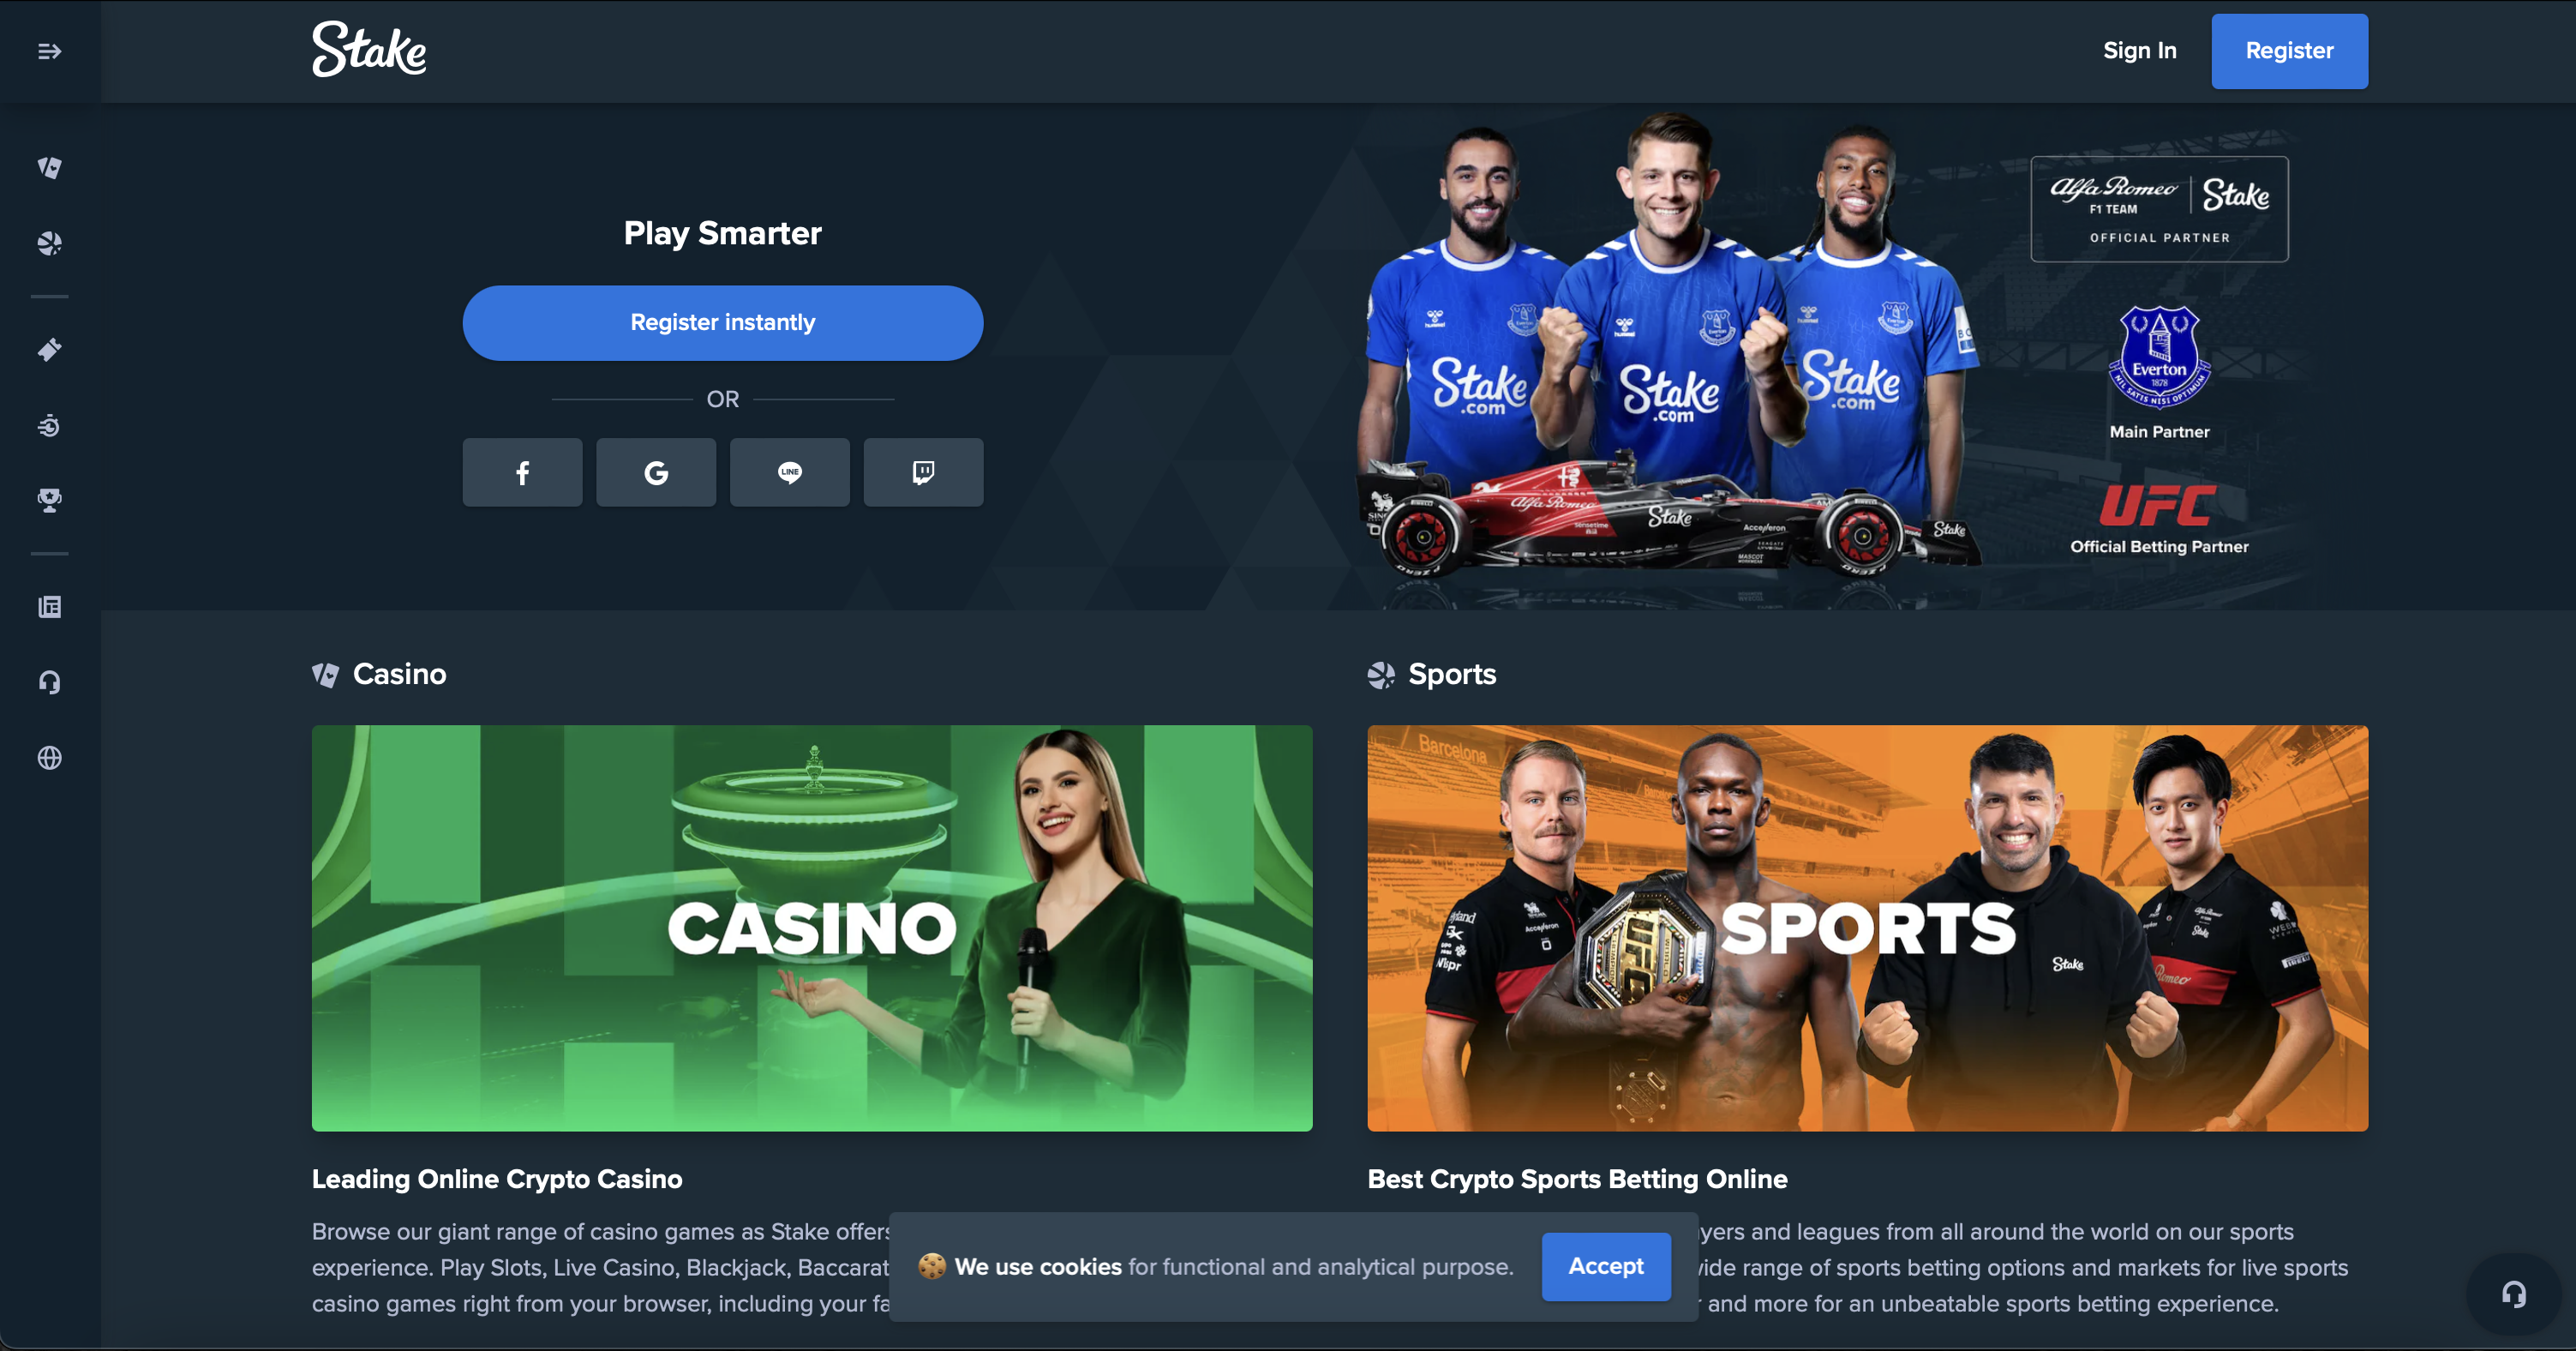 The Stake US code can help you get off on the right foot with the casino and sportsbook